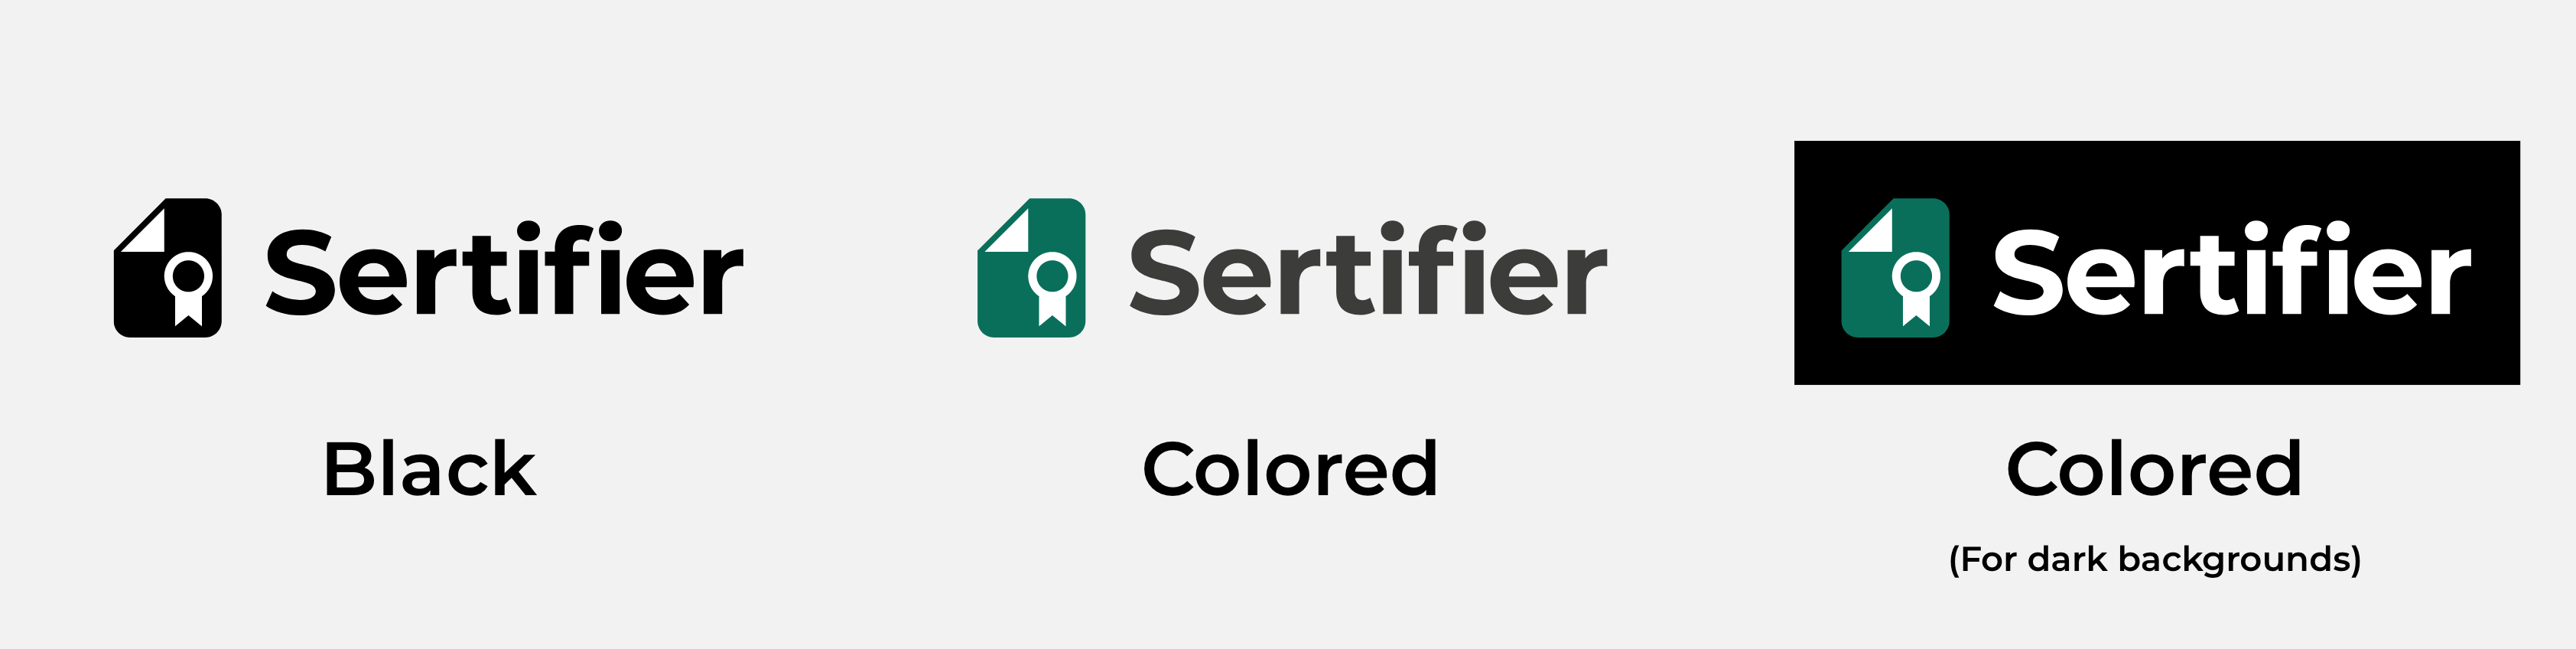 Sertifier Logos with Different Colors